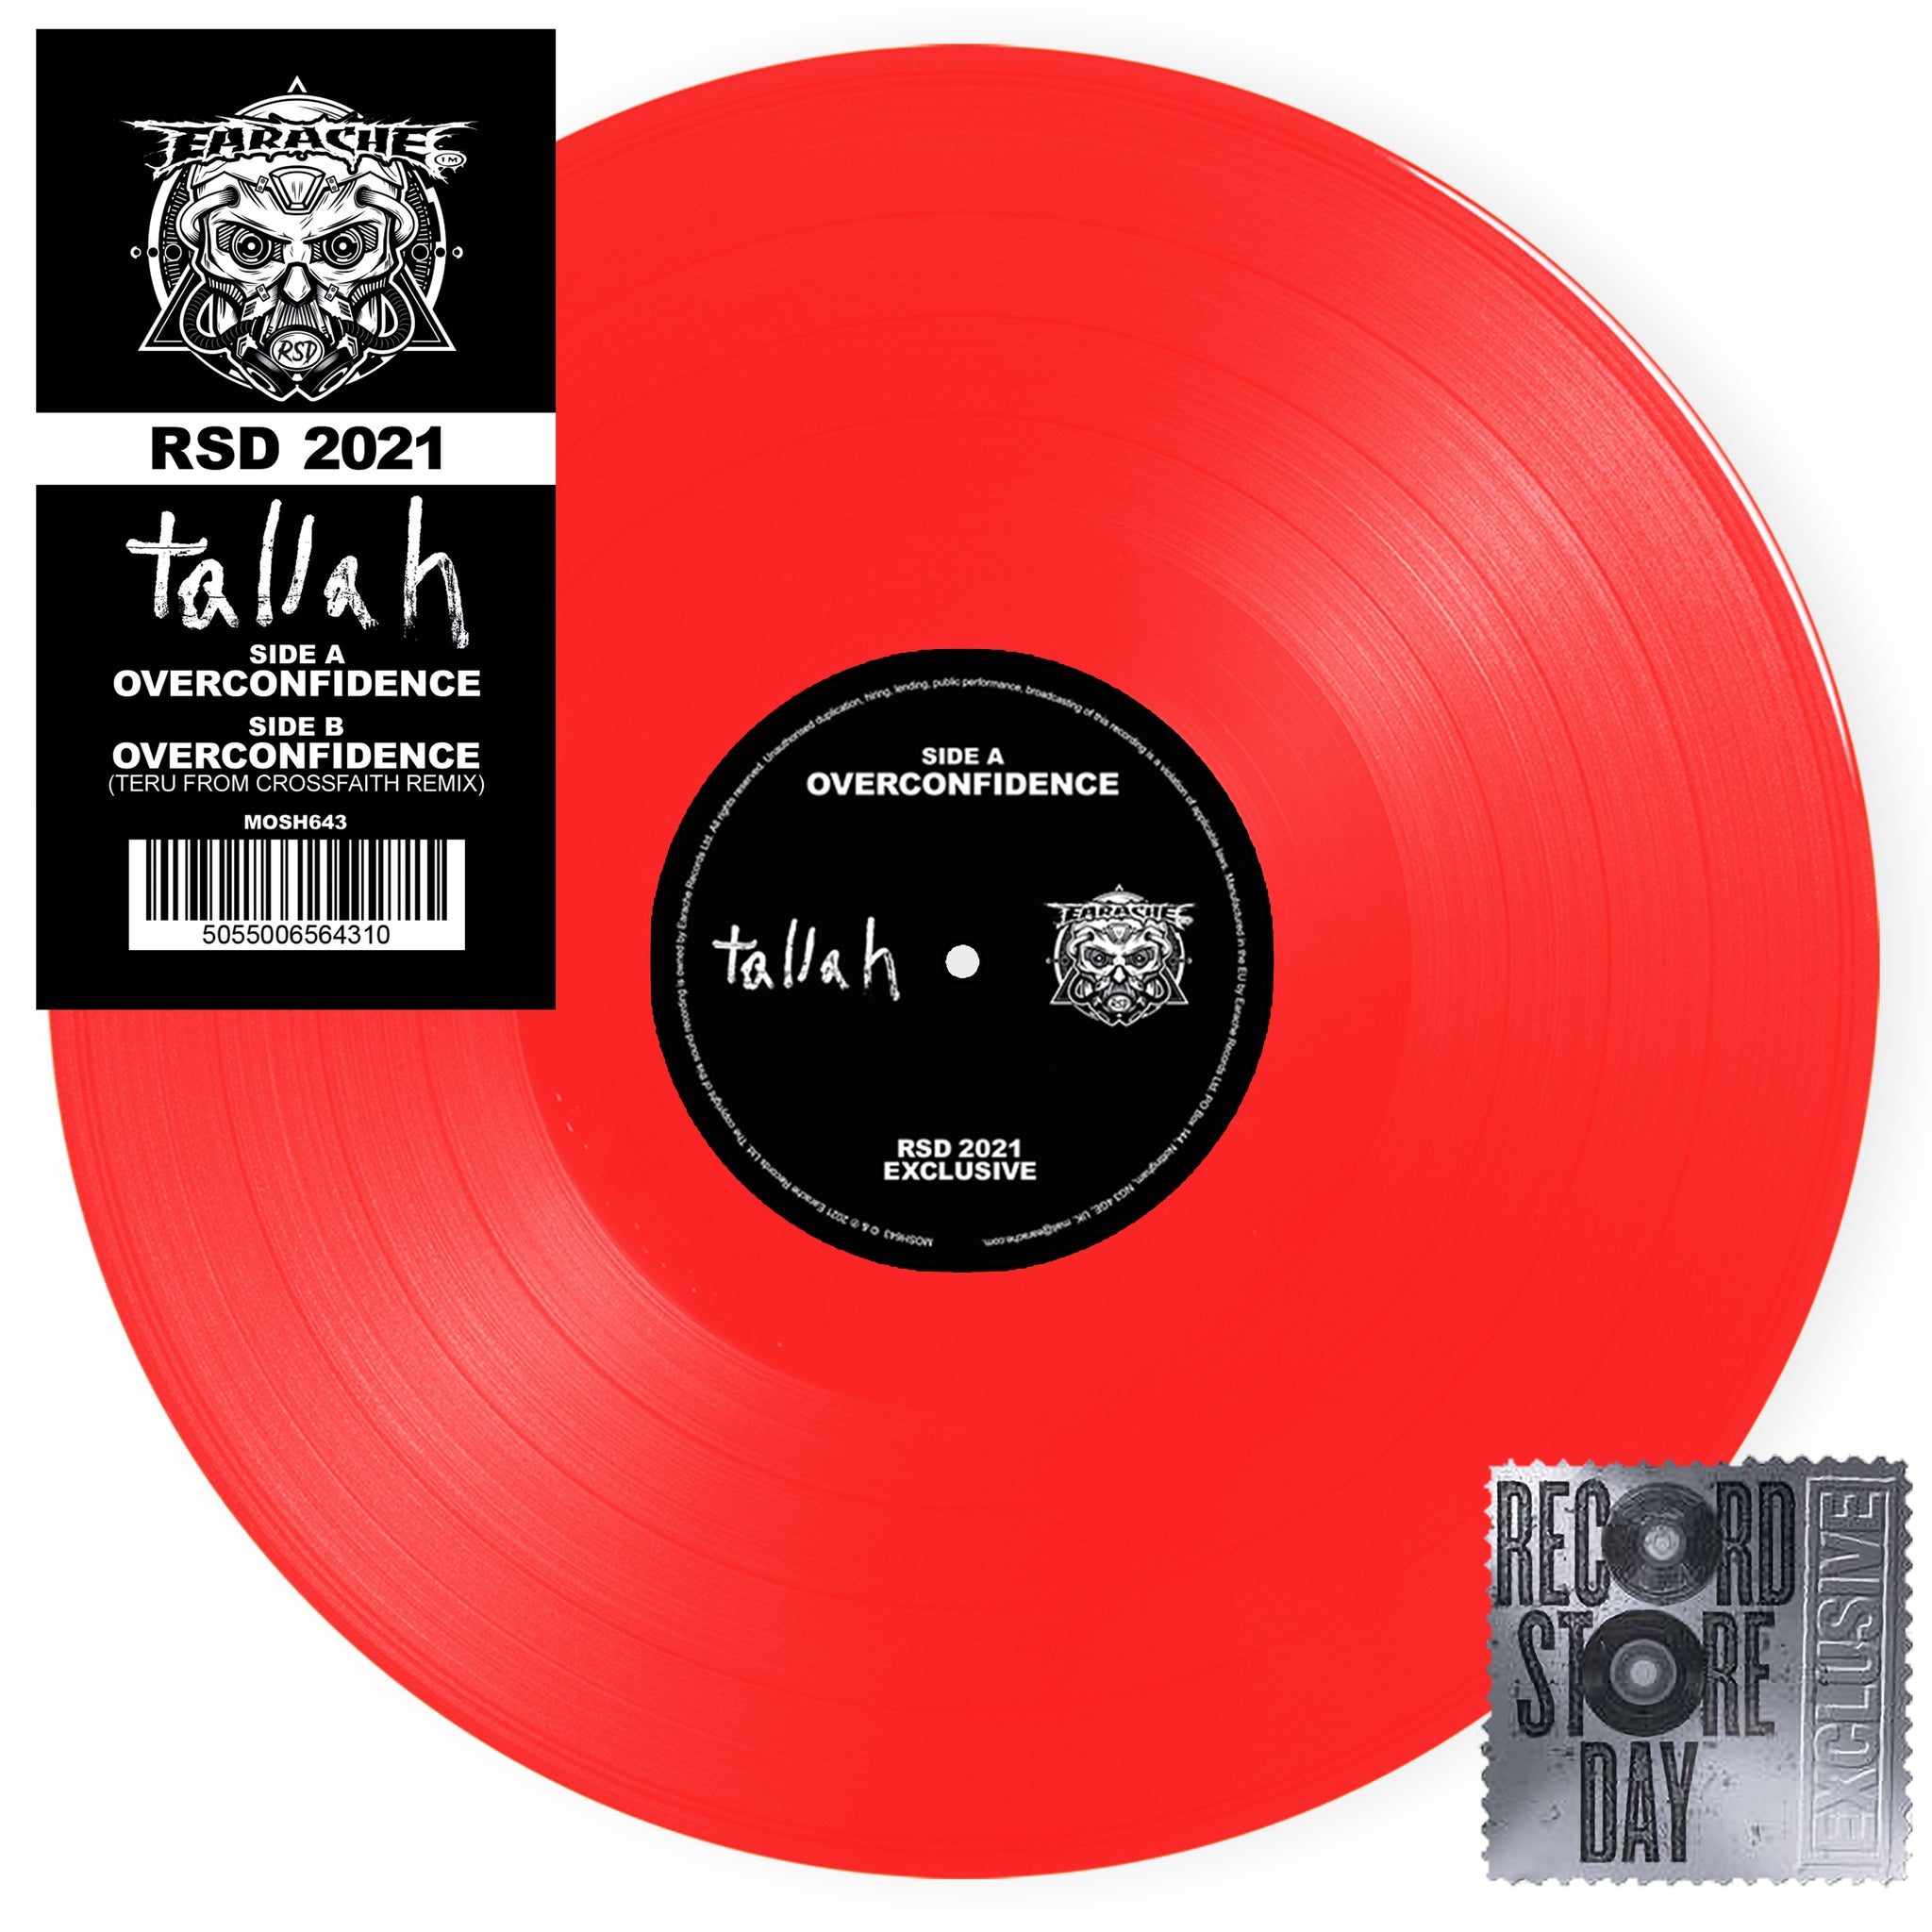 Tallah "Overconfidence" Red 7" Vinyl - RECORD STORE DAY RELEASE